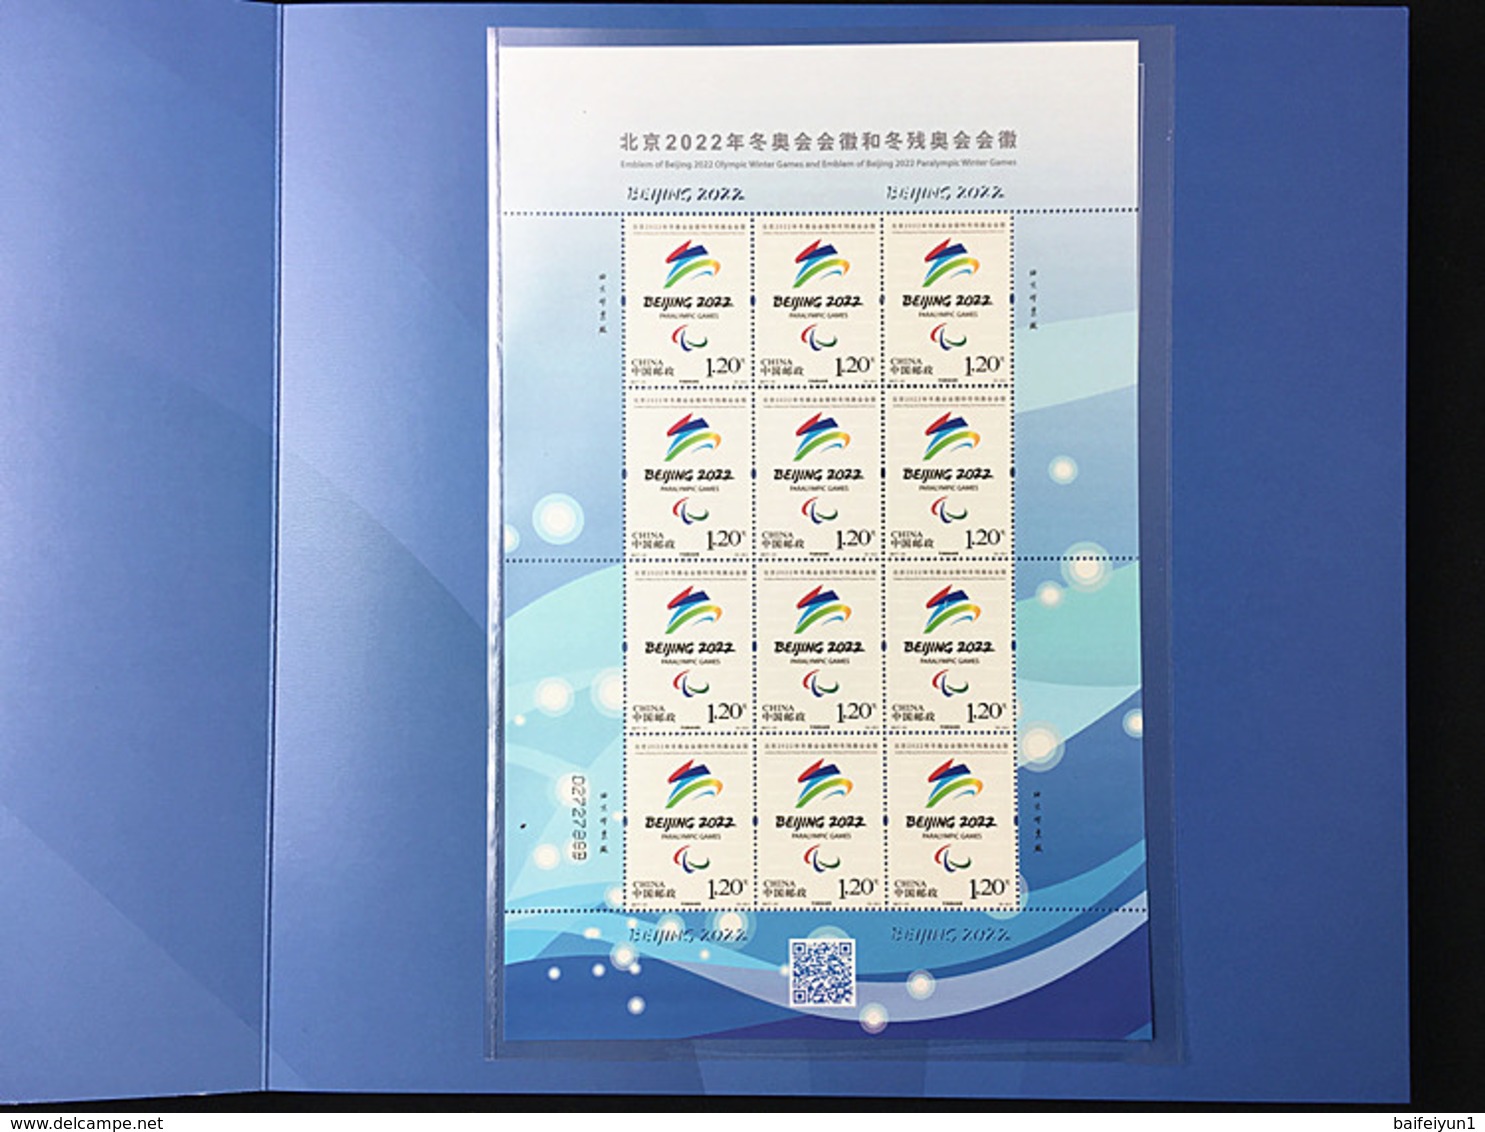 China 2017-31 Emble of BeiJing 2022 Olympic Winter Game and Emble of BeiJing 2022 Paralympic Winter Game  Folder